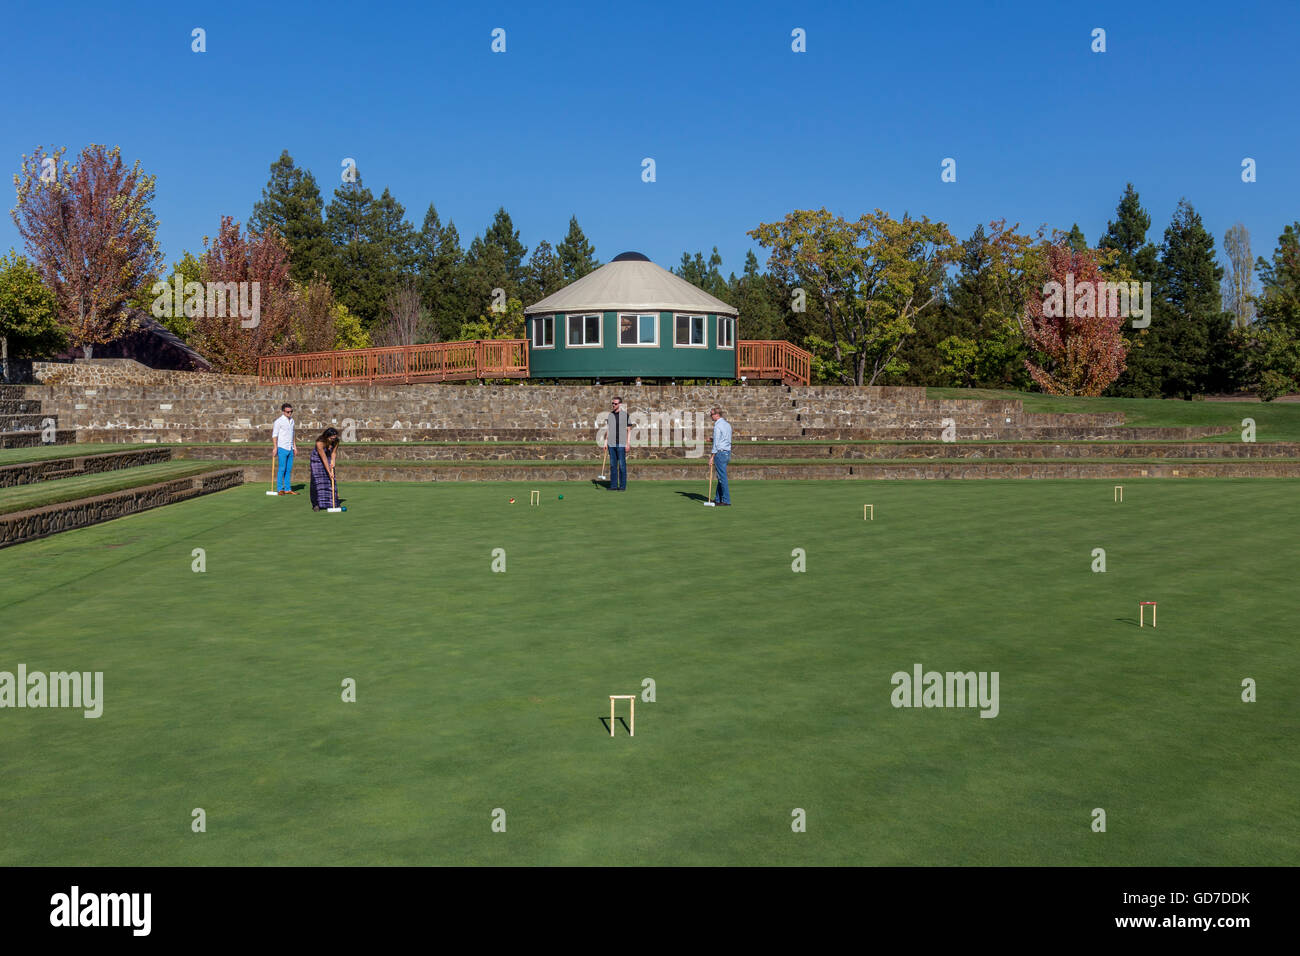 people, playing croquet, croquet players, game of croquet, wine tasting, Sonoma-Cutrer Vineyards, Sonoma-Cutrer, Sonoma Cutrer, Windsor, California Stock Photo